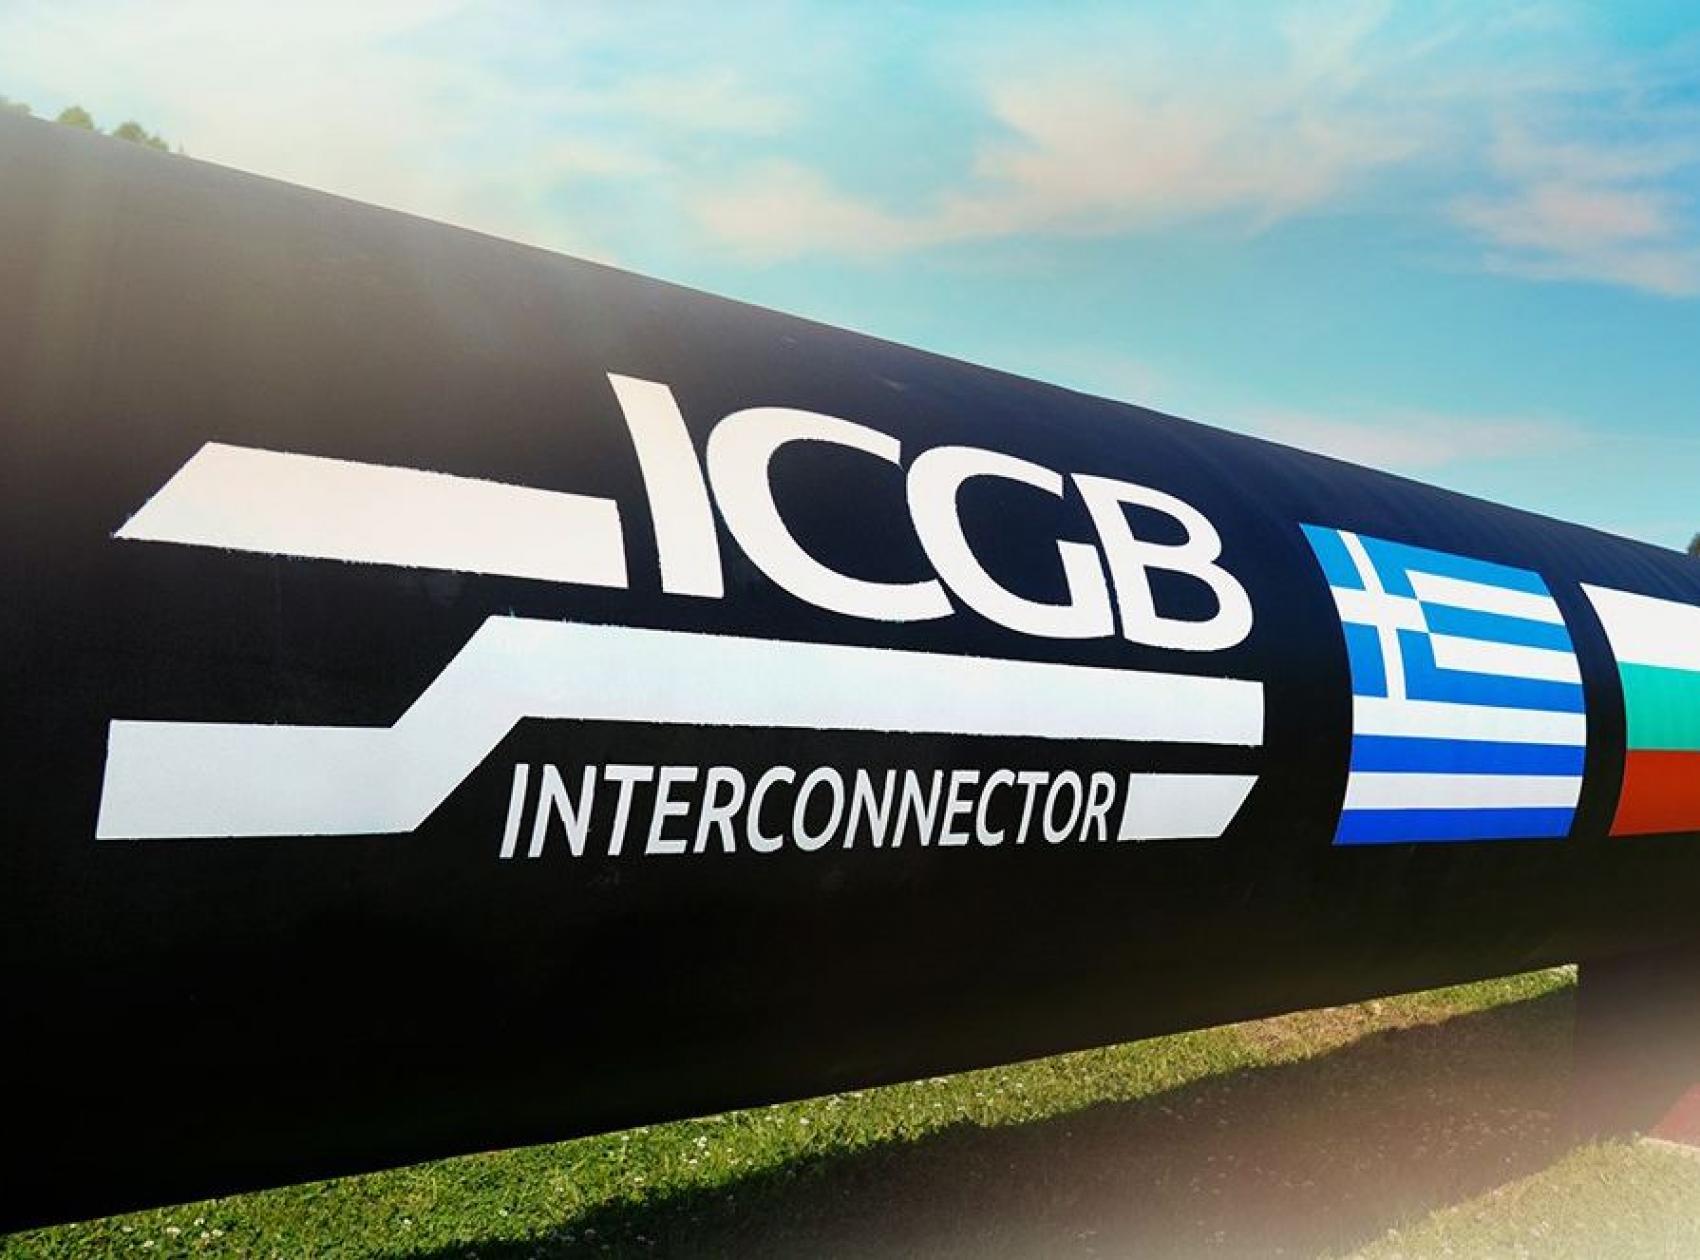 The independent transmission operator ICGB, which operates the Greece-Bulgaria commercial